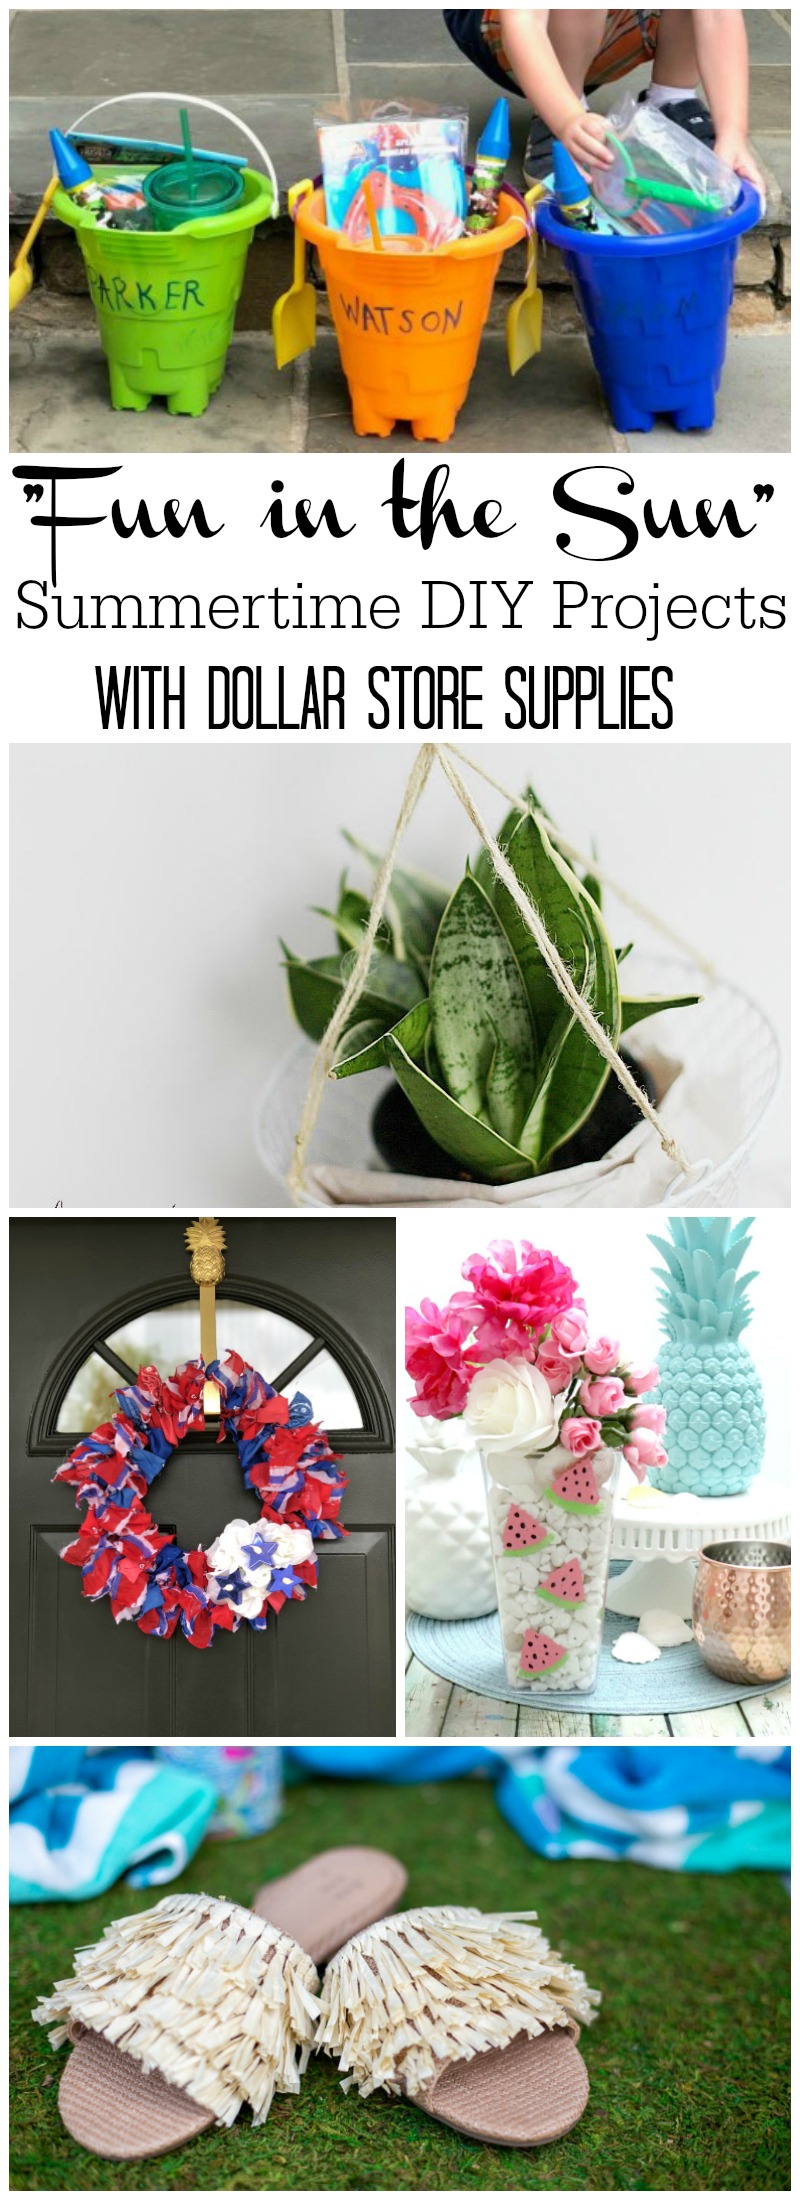 Fun in the Sun - Summertime DIY projects with Dollar Store Supplies